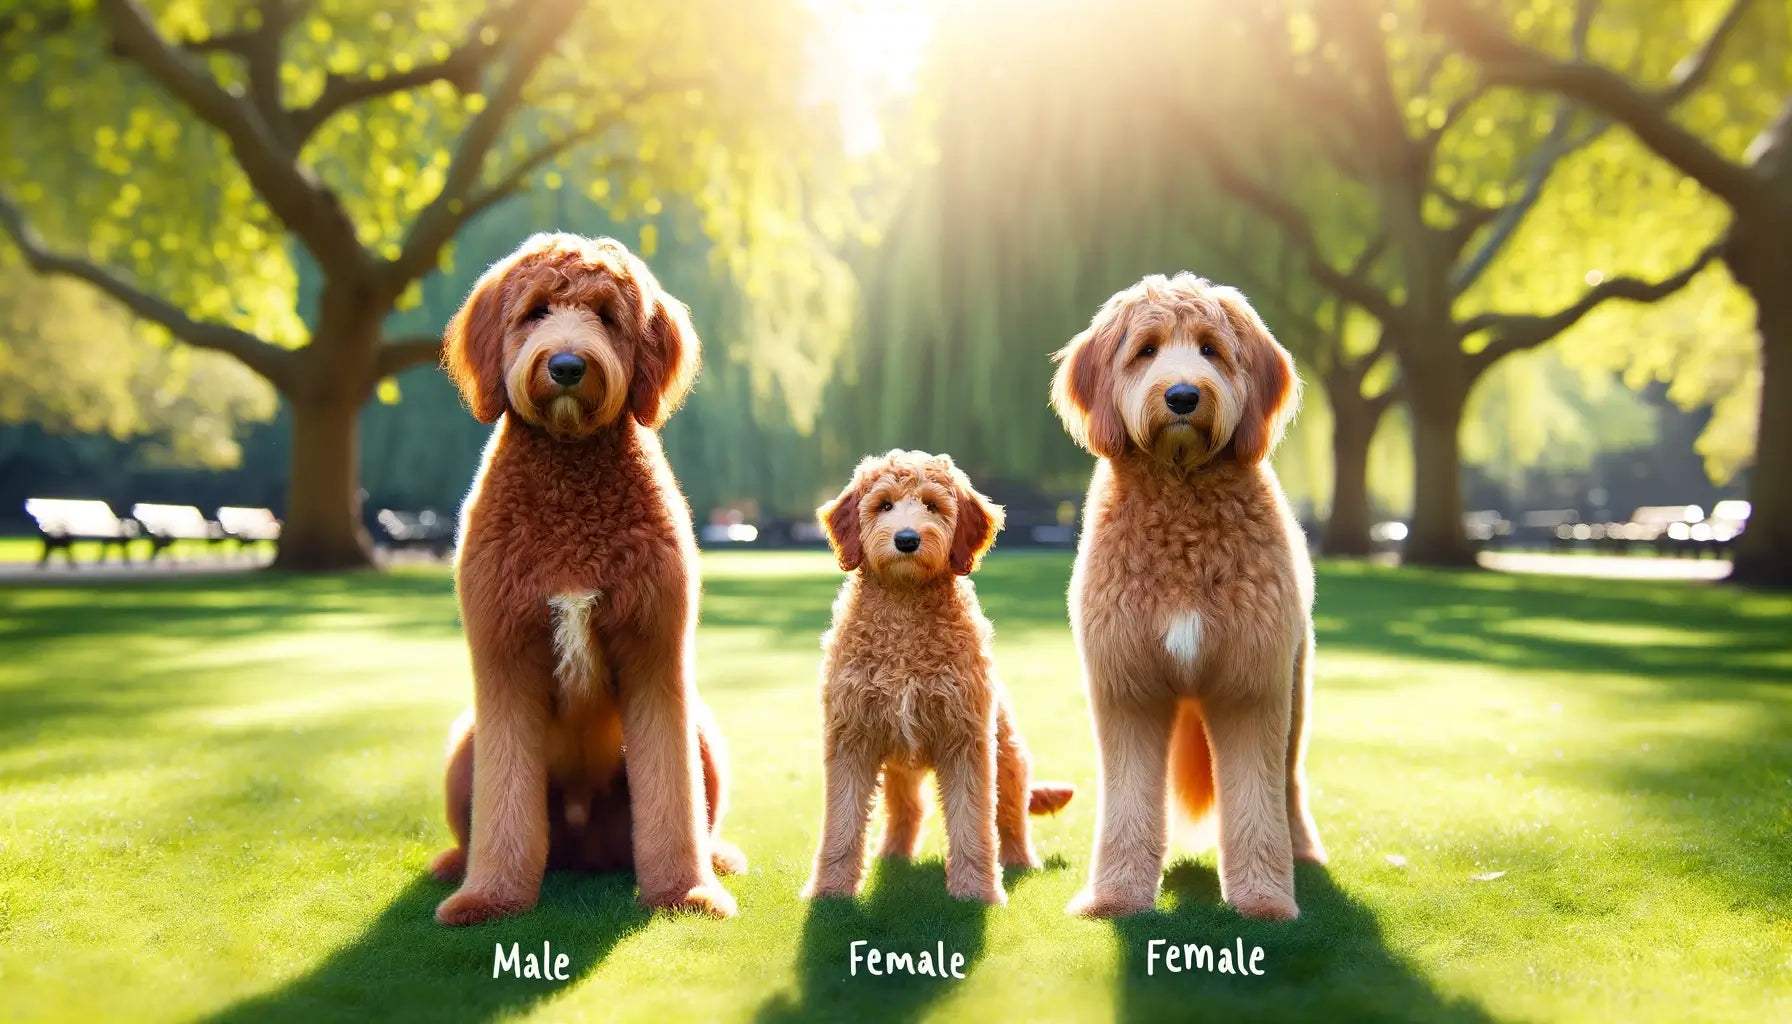 Red Goldendoodle male and female in a park.